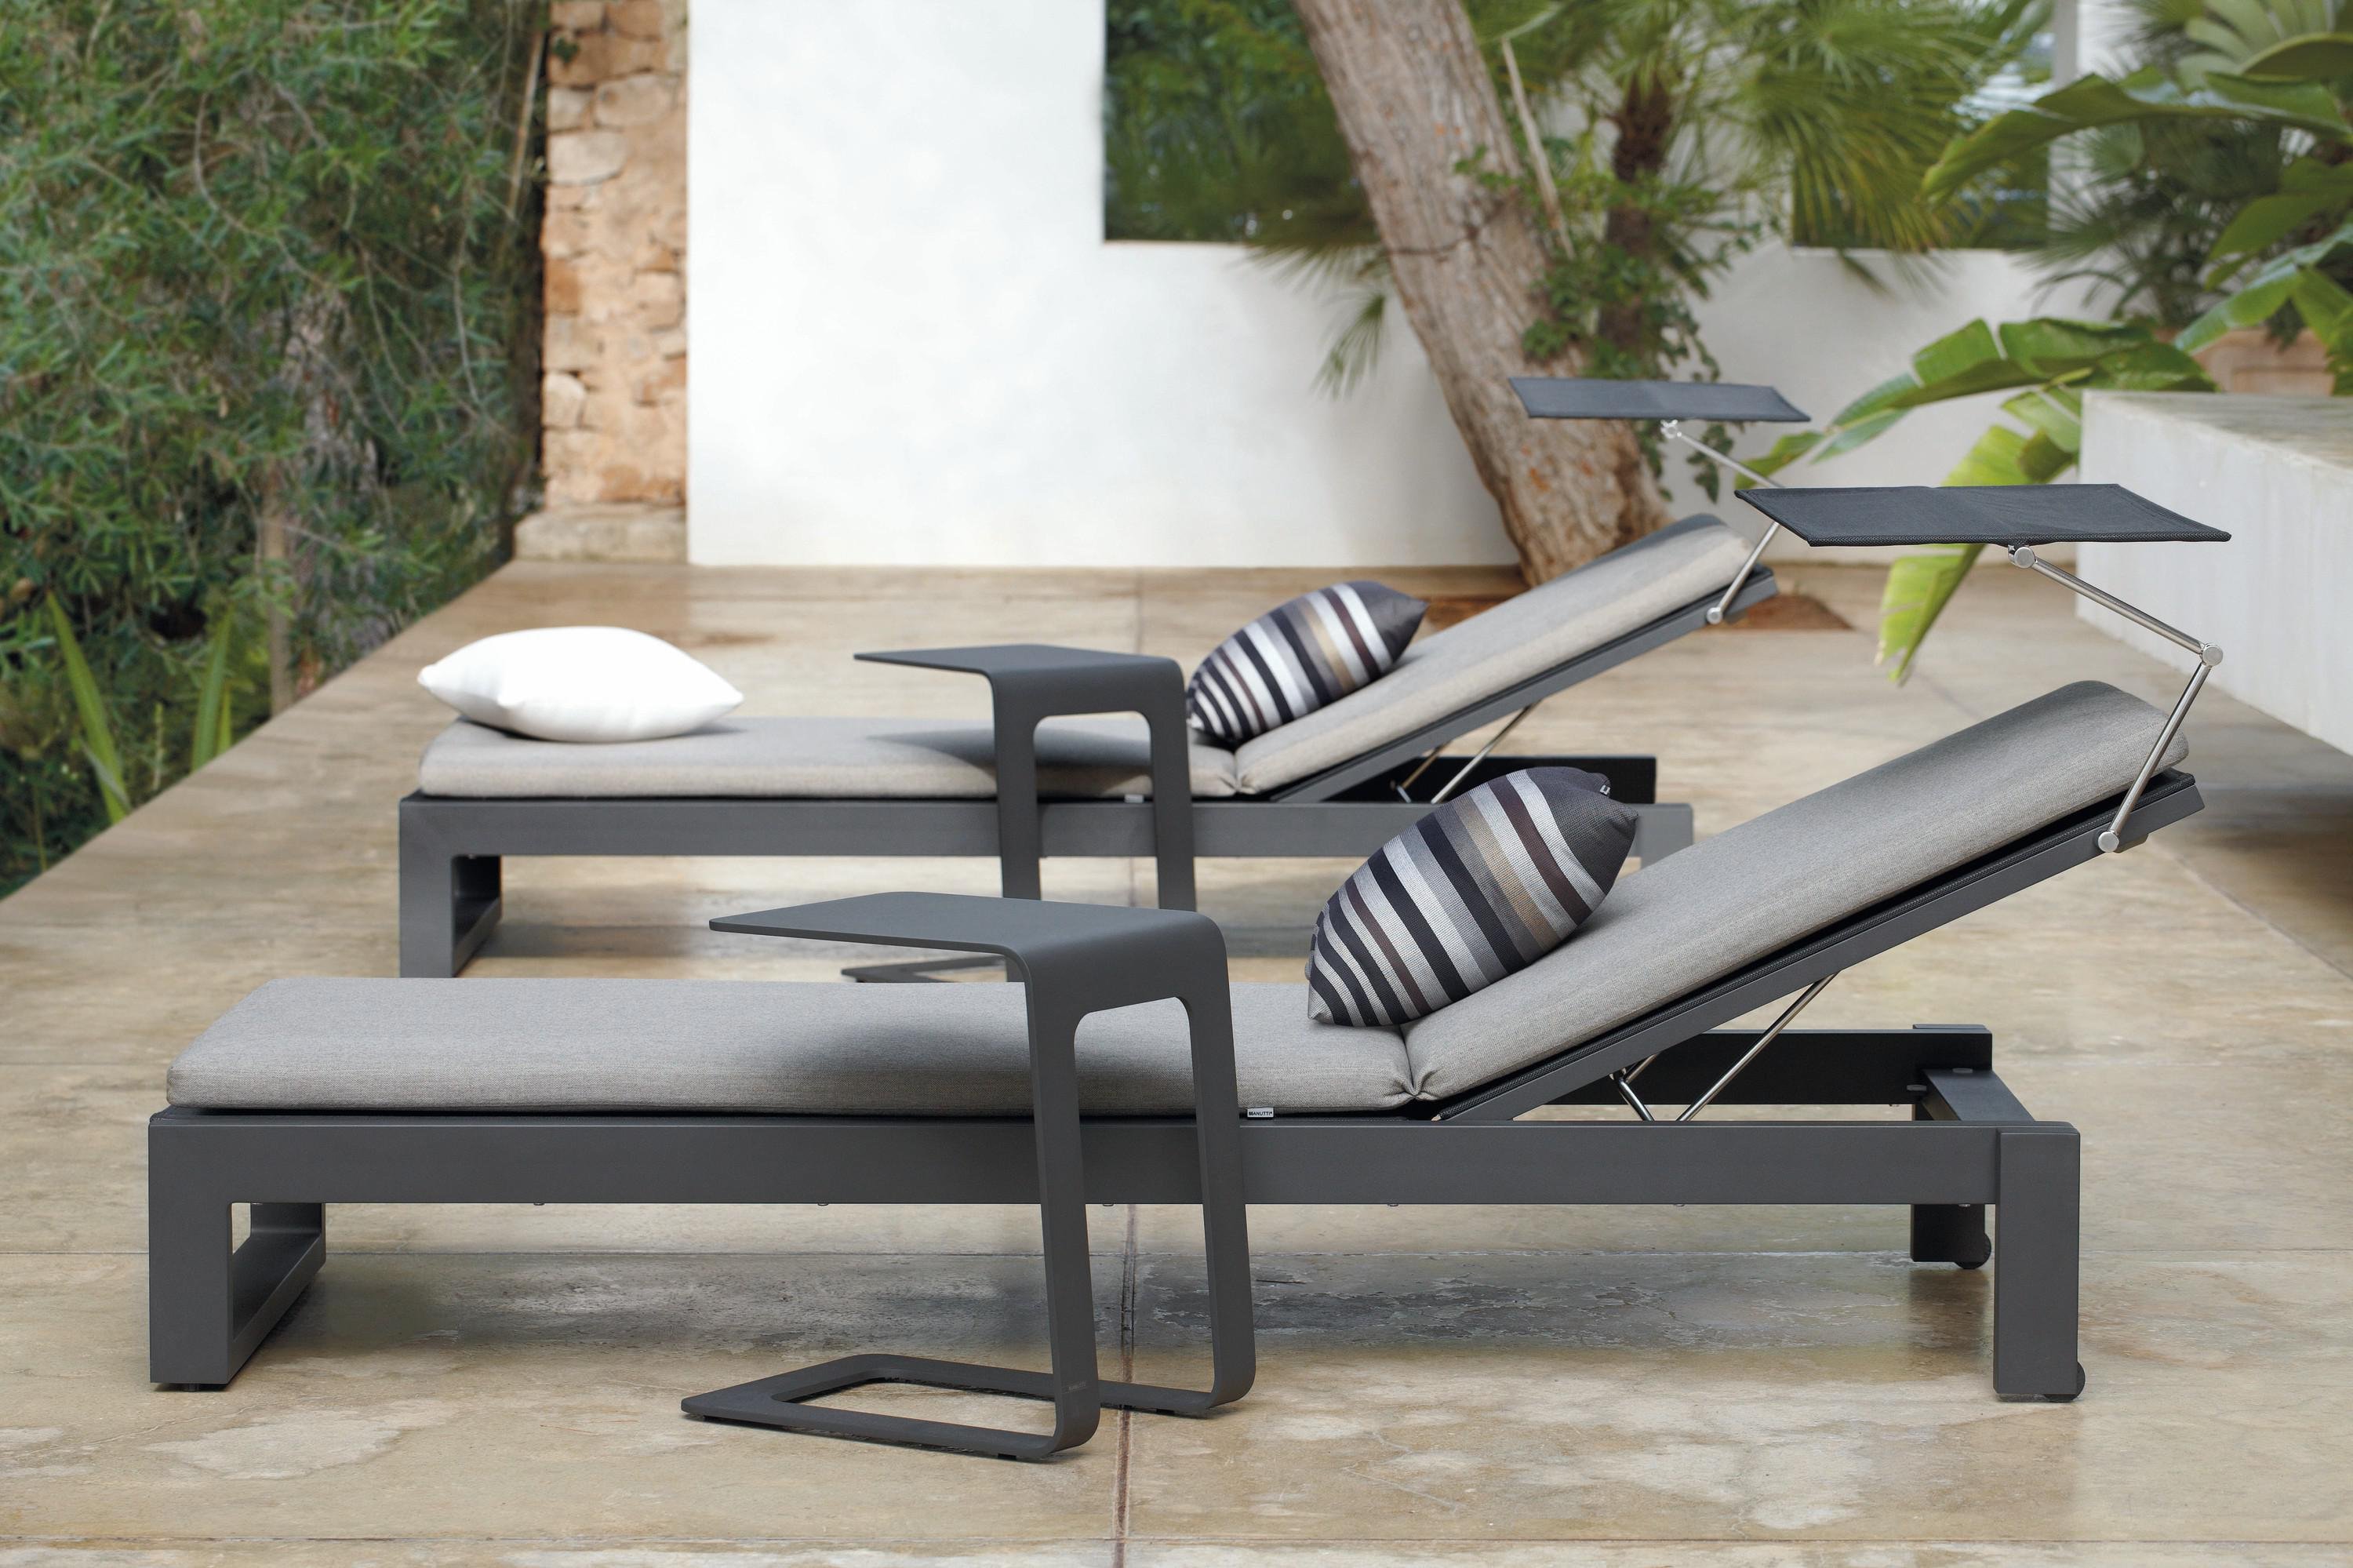 Fuse Lounger from Manutti, designed by Stephane De Winter